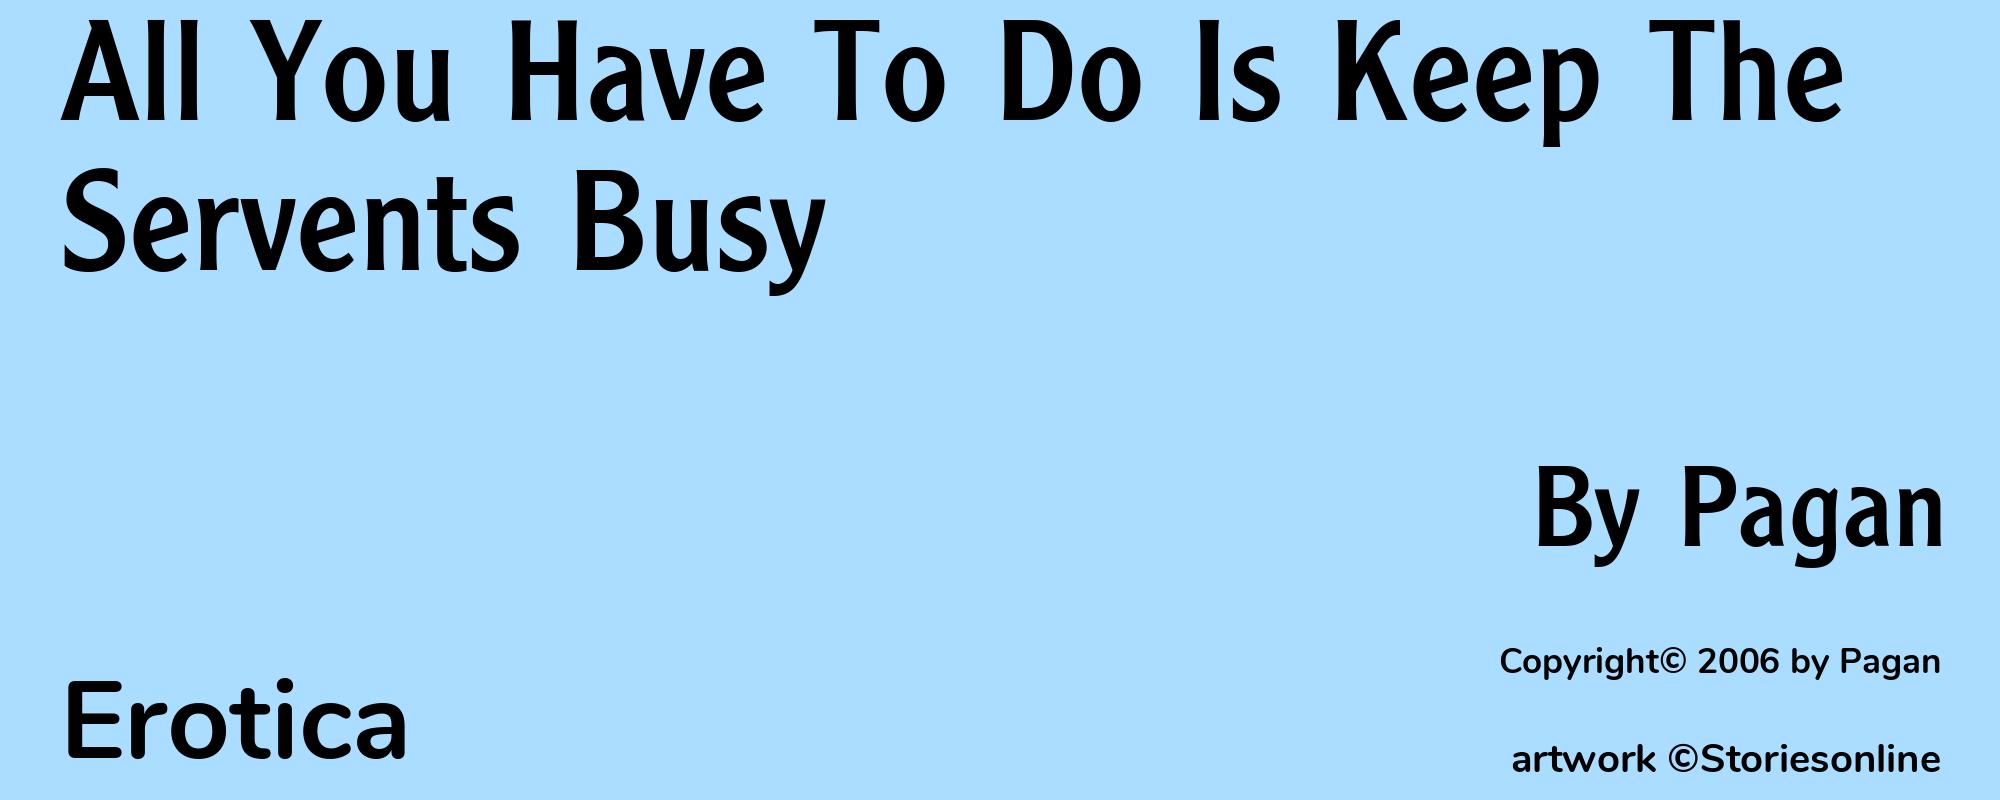 All You Have To Do Is Keep The Servents Busy - Cover